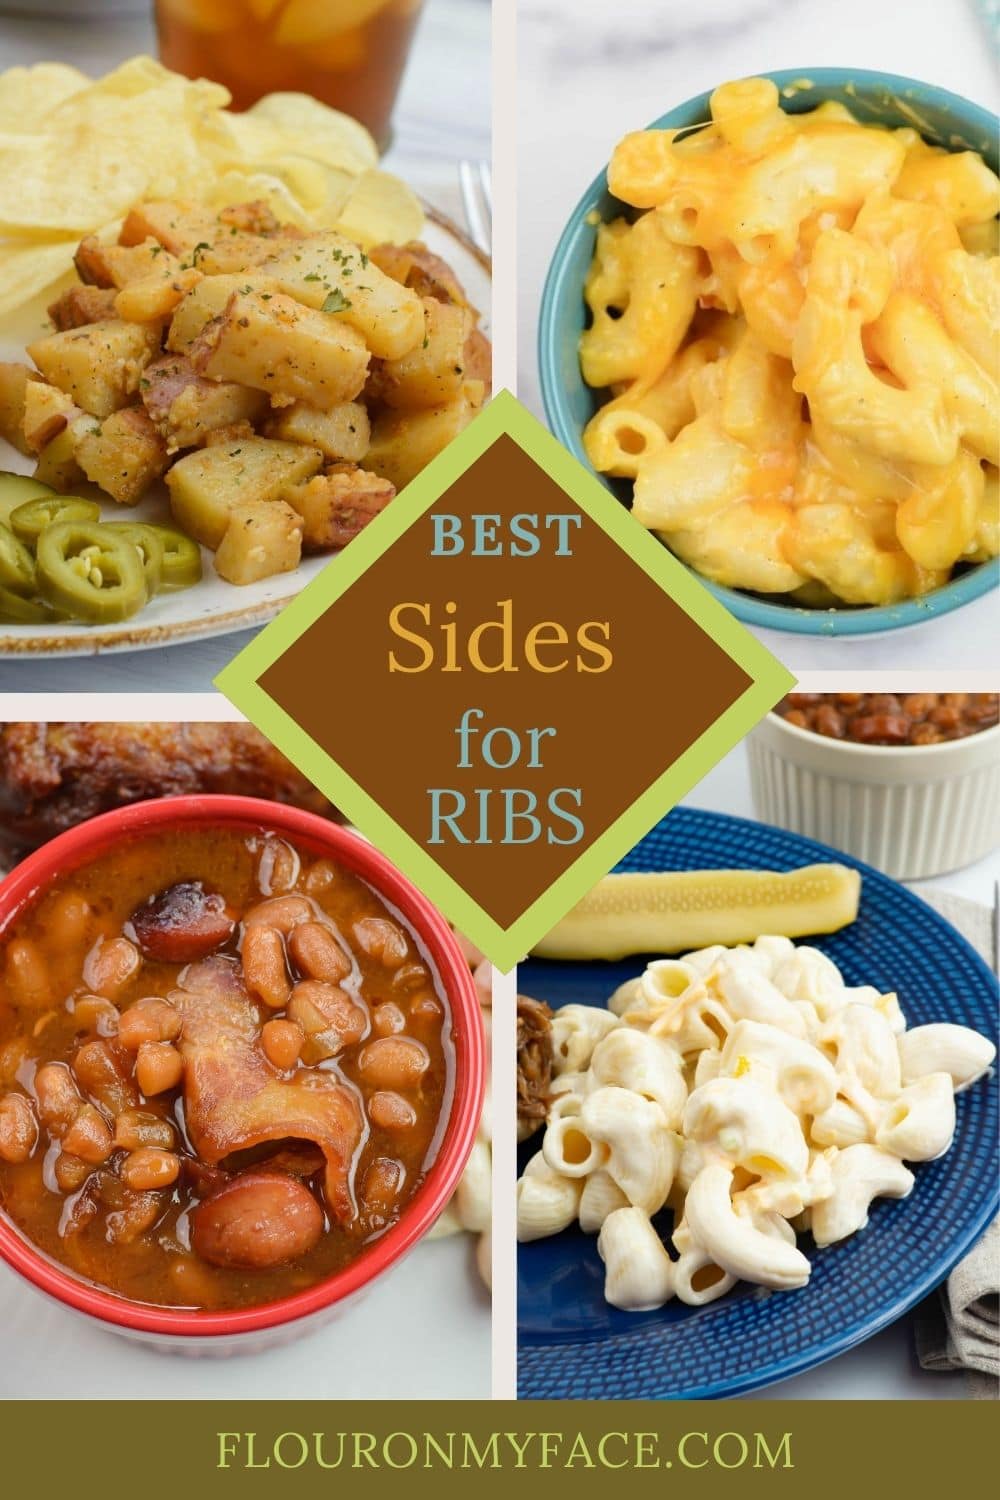 Collage image of best sides for ribs.